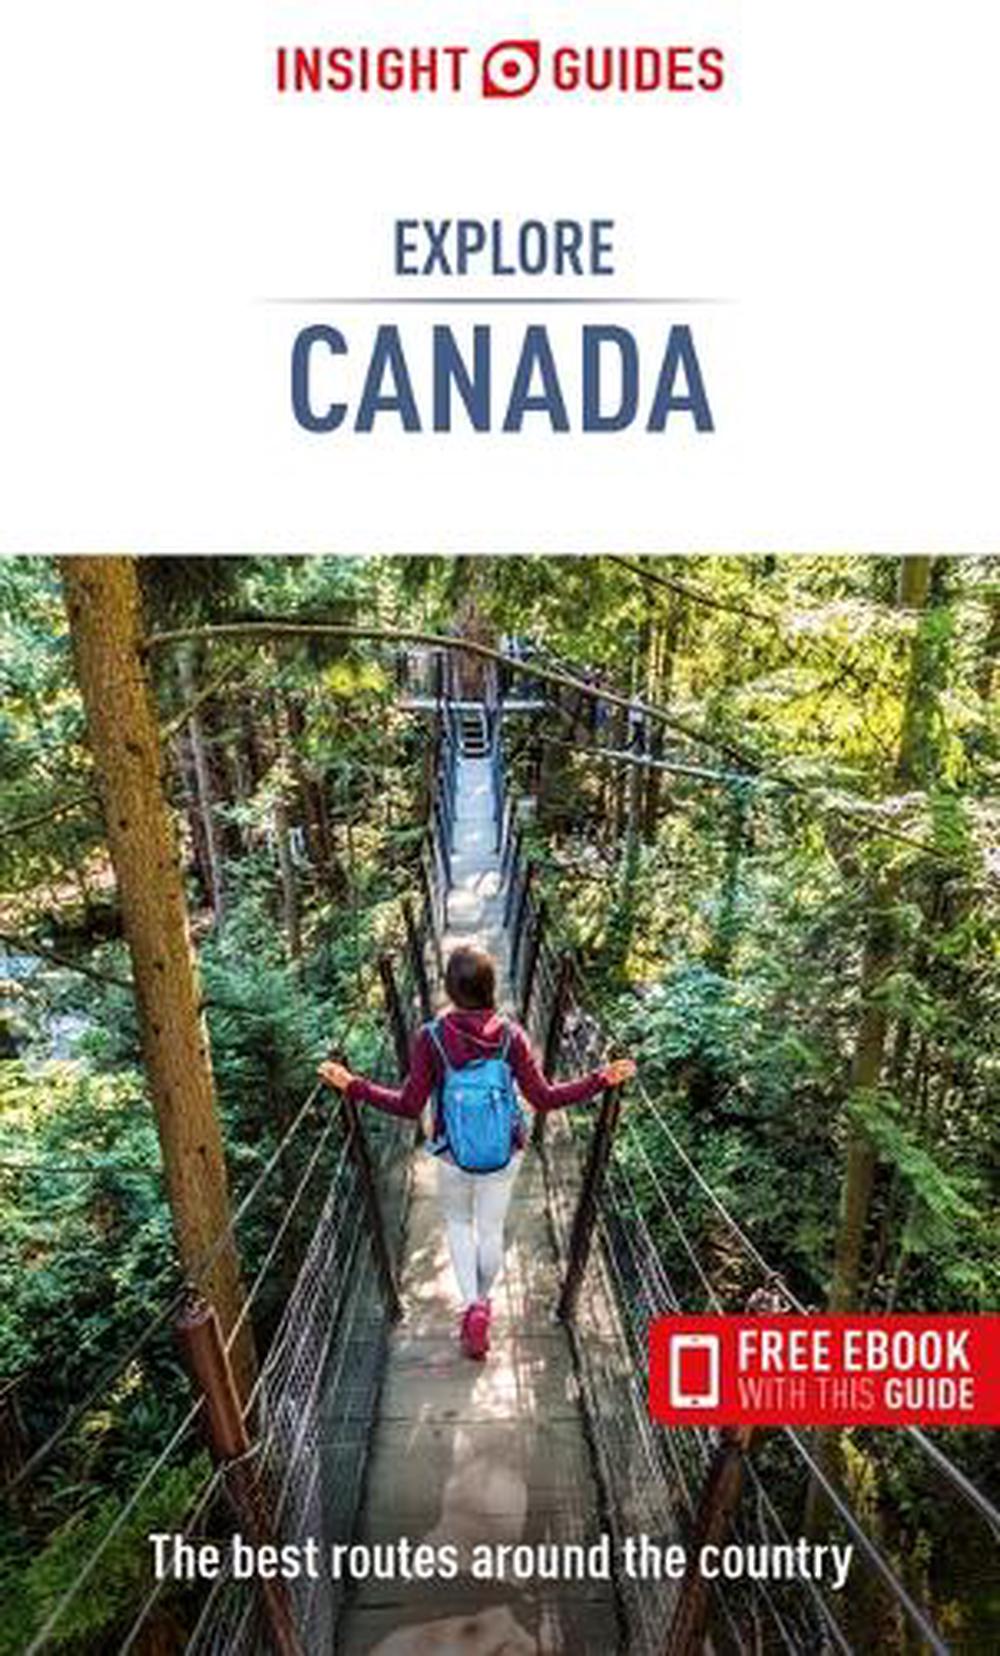 9781839052873　The　Explore　Guides,　Paperback,　Guide　(Travel　at　Insight　Guides　online　Free　Insight　Buy　Canada　by　Ebook)　with　Nile